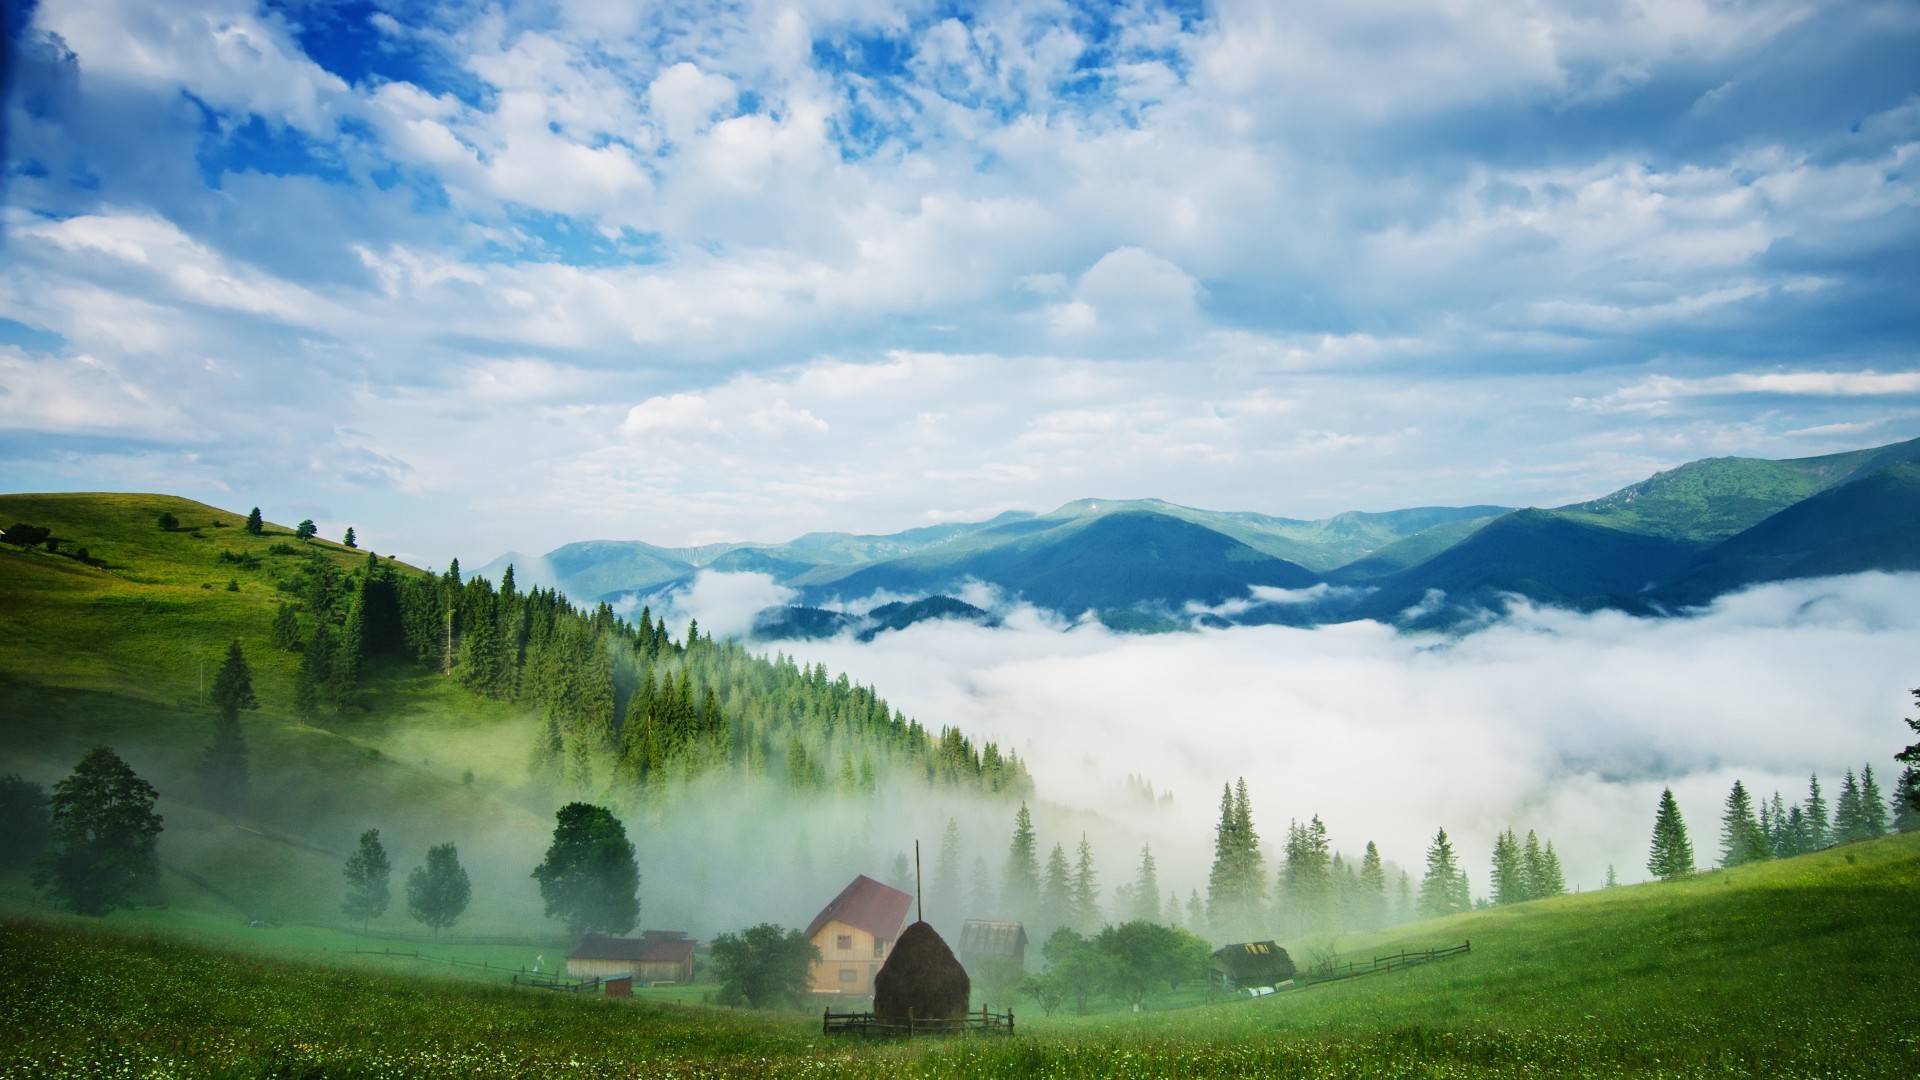 nature, Landscape, Clouds, Trees, Valley, Mountain, Hill, Mist, Field, Grass, Forest, House, Haystacks, Pine Trees, Morning Wallpaper